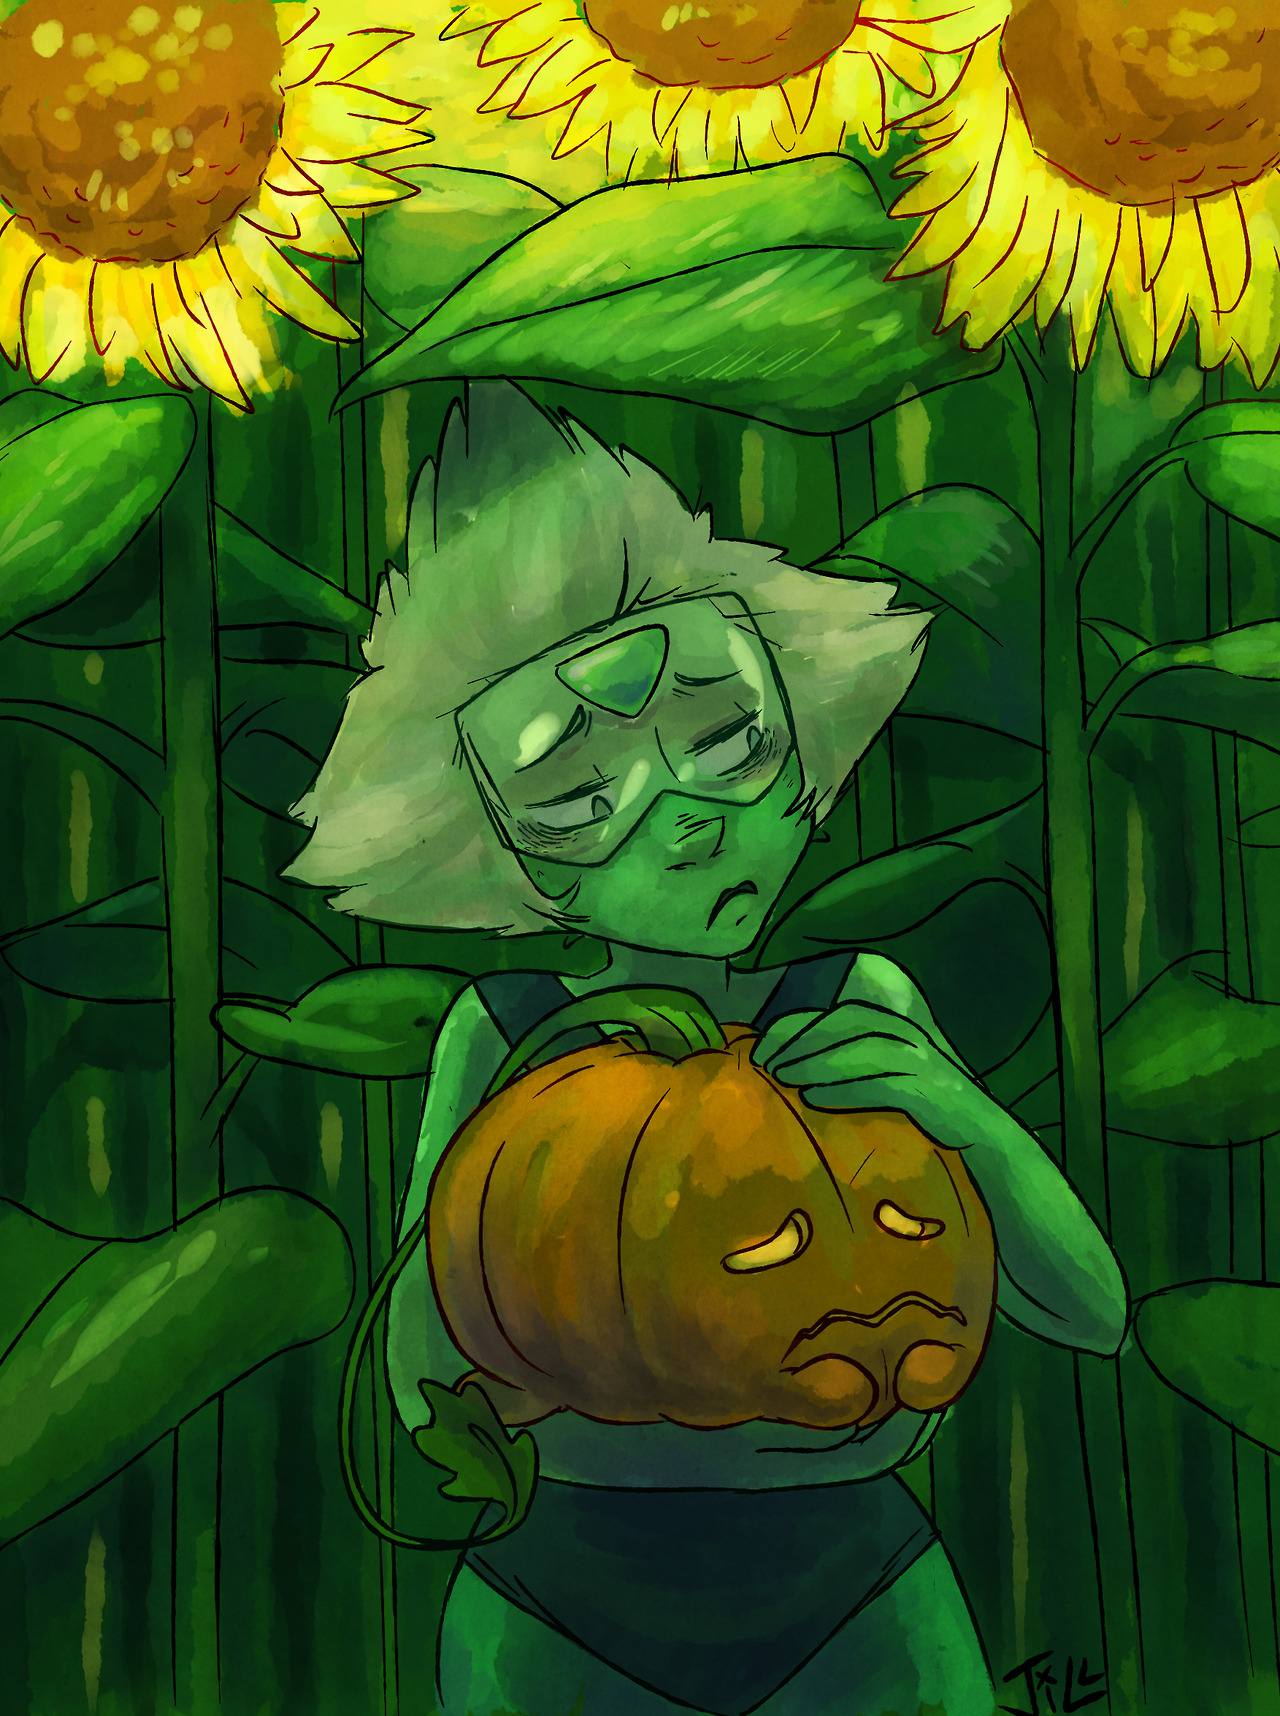 I’m dying, but simultaneously living, peridot cares about her so much, and I can’t handle it. hang in there, green bean.